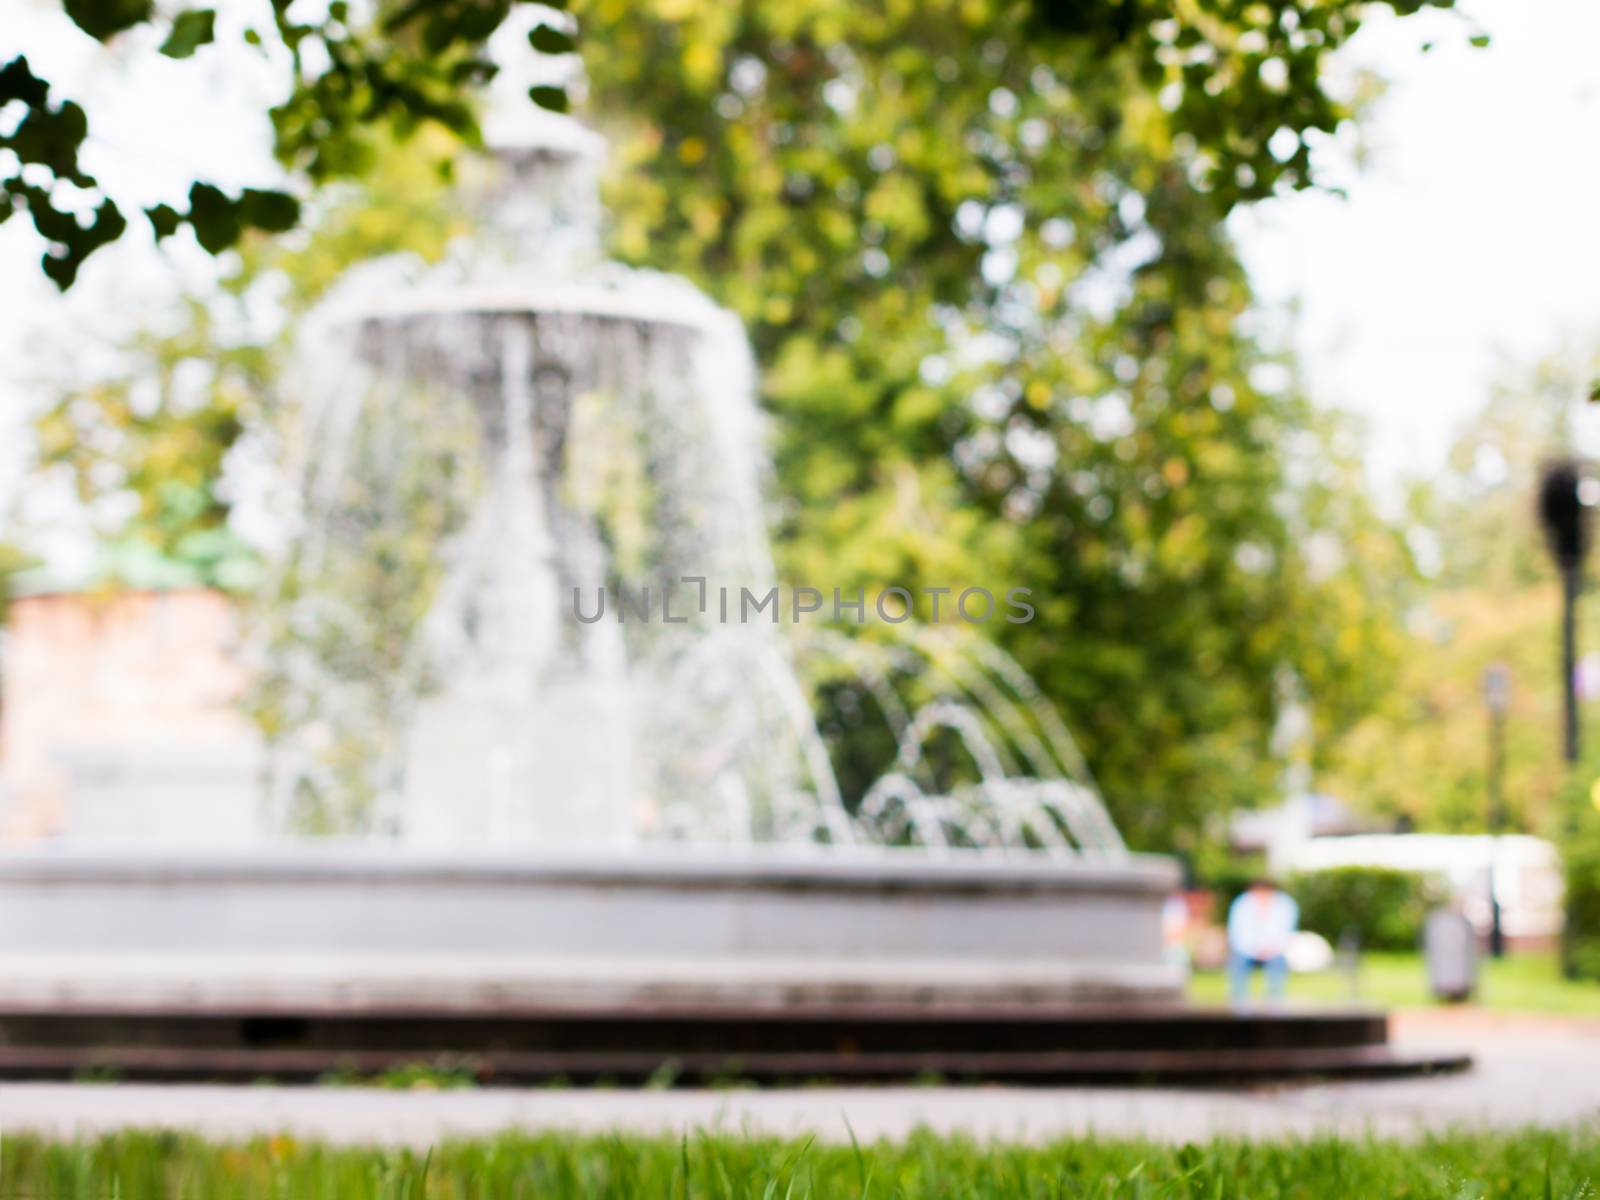 blurred of fountain and green foliage, out of focus image. Fountain and green trees as background